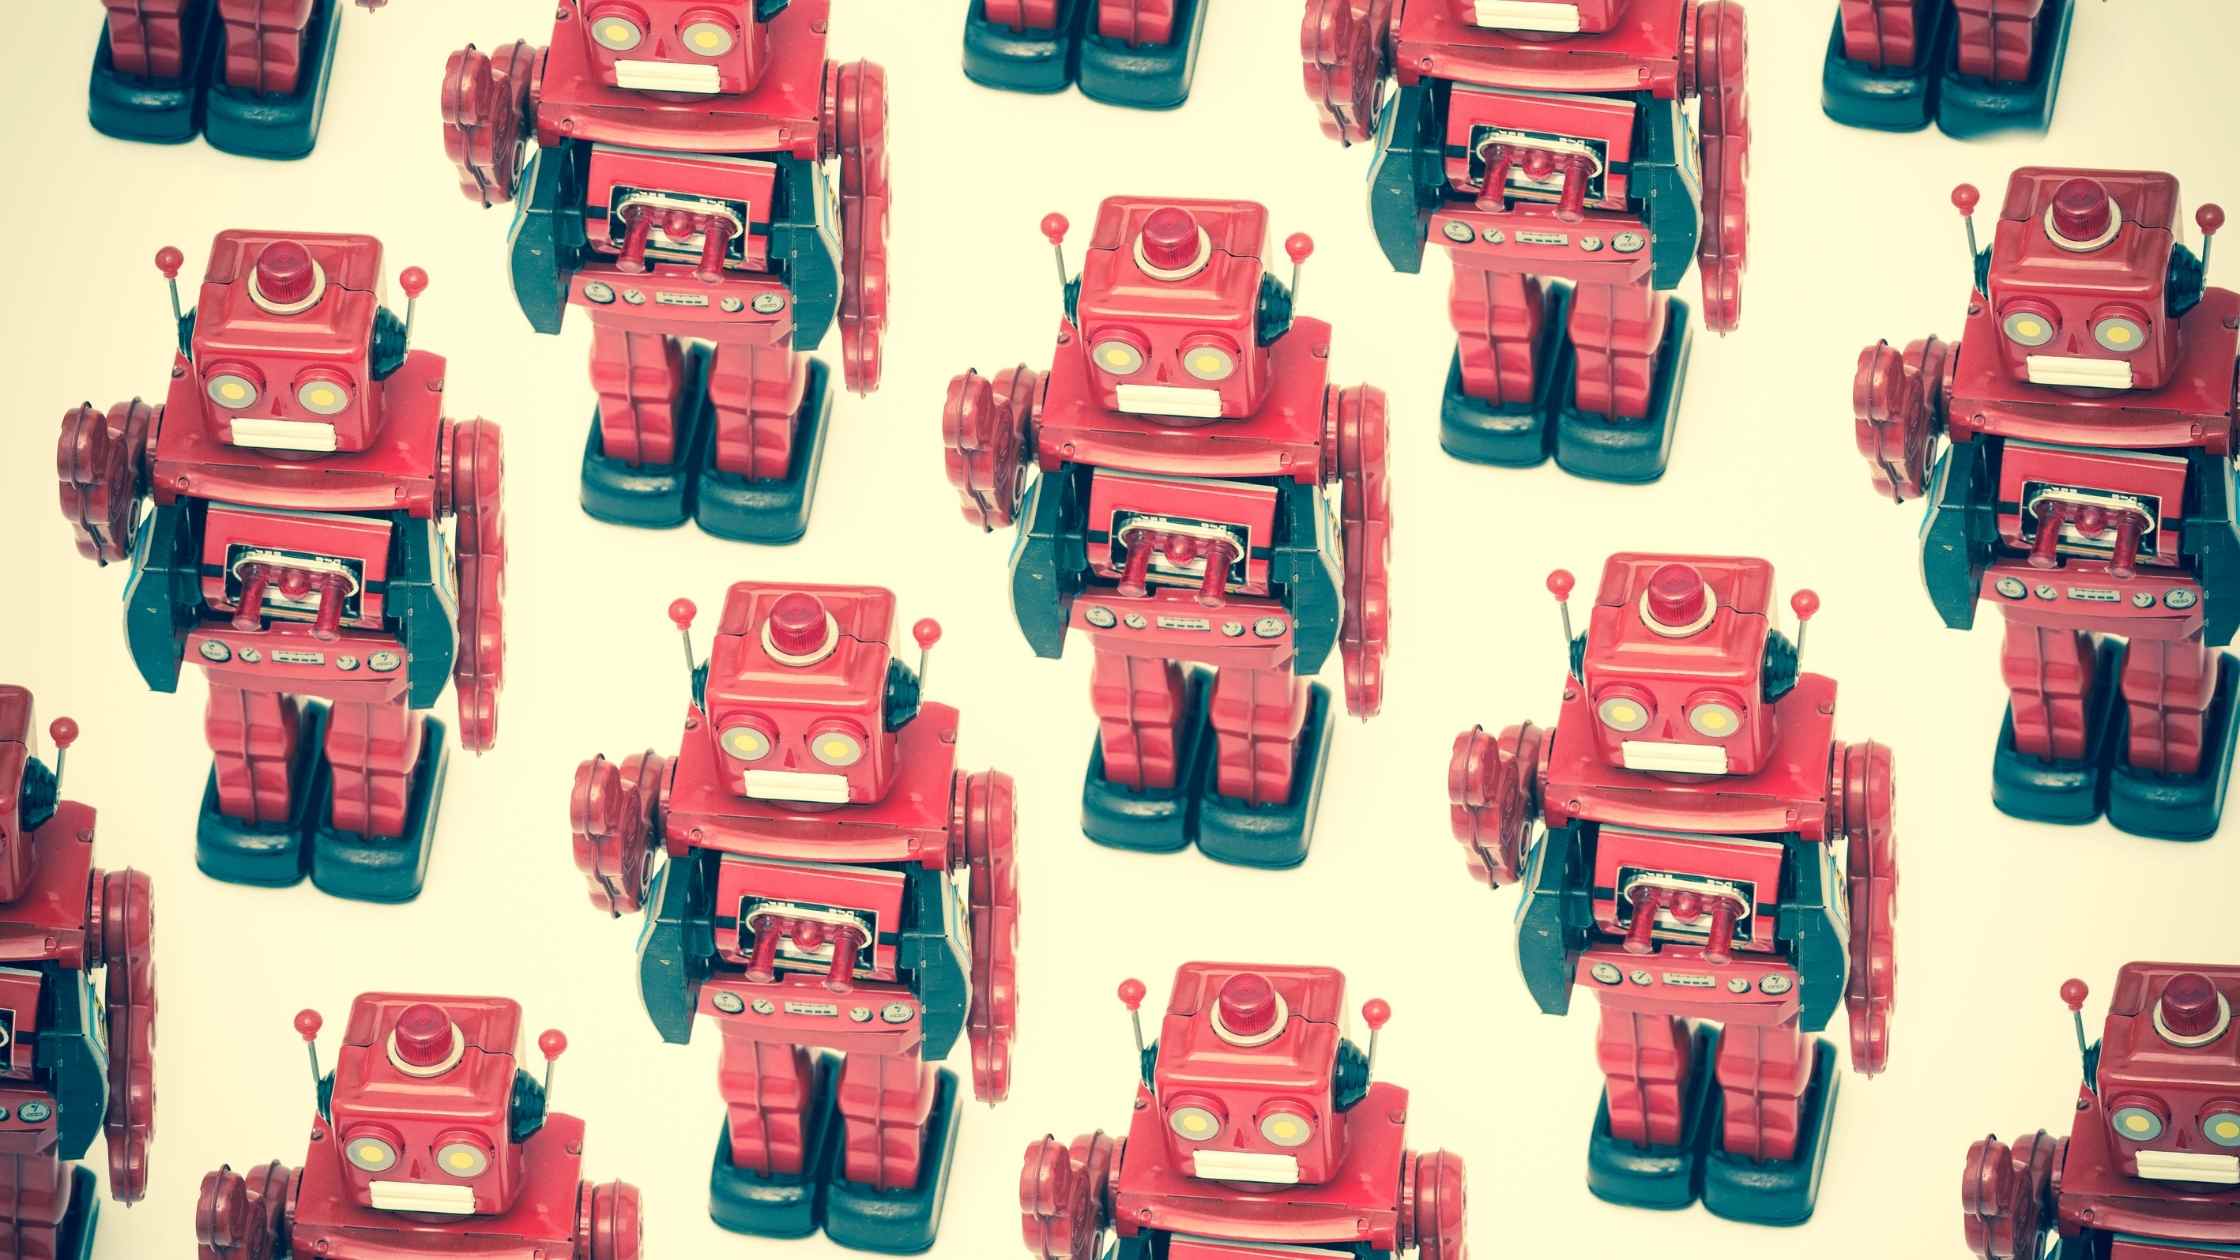 Group of red toy robots